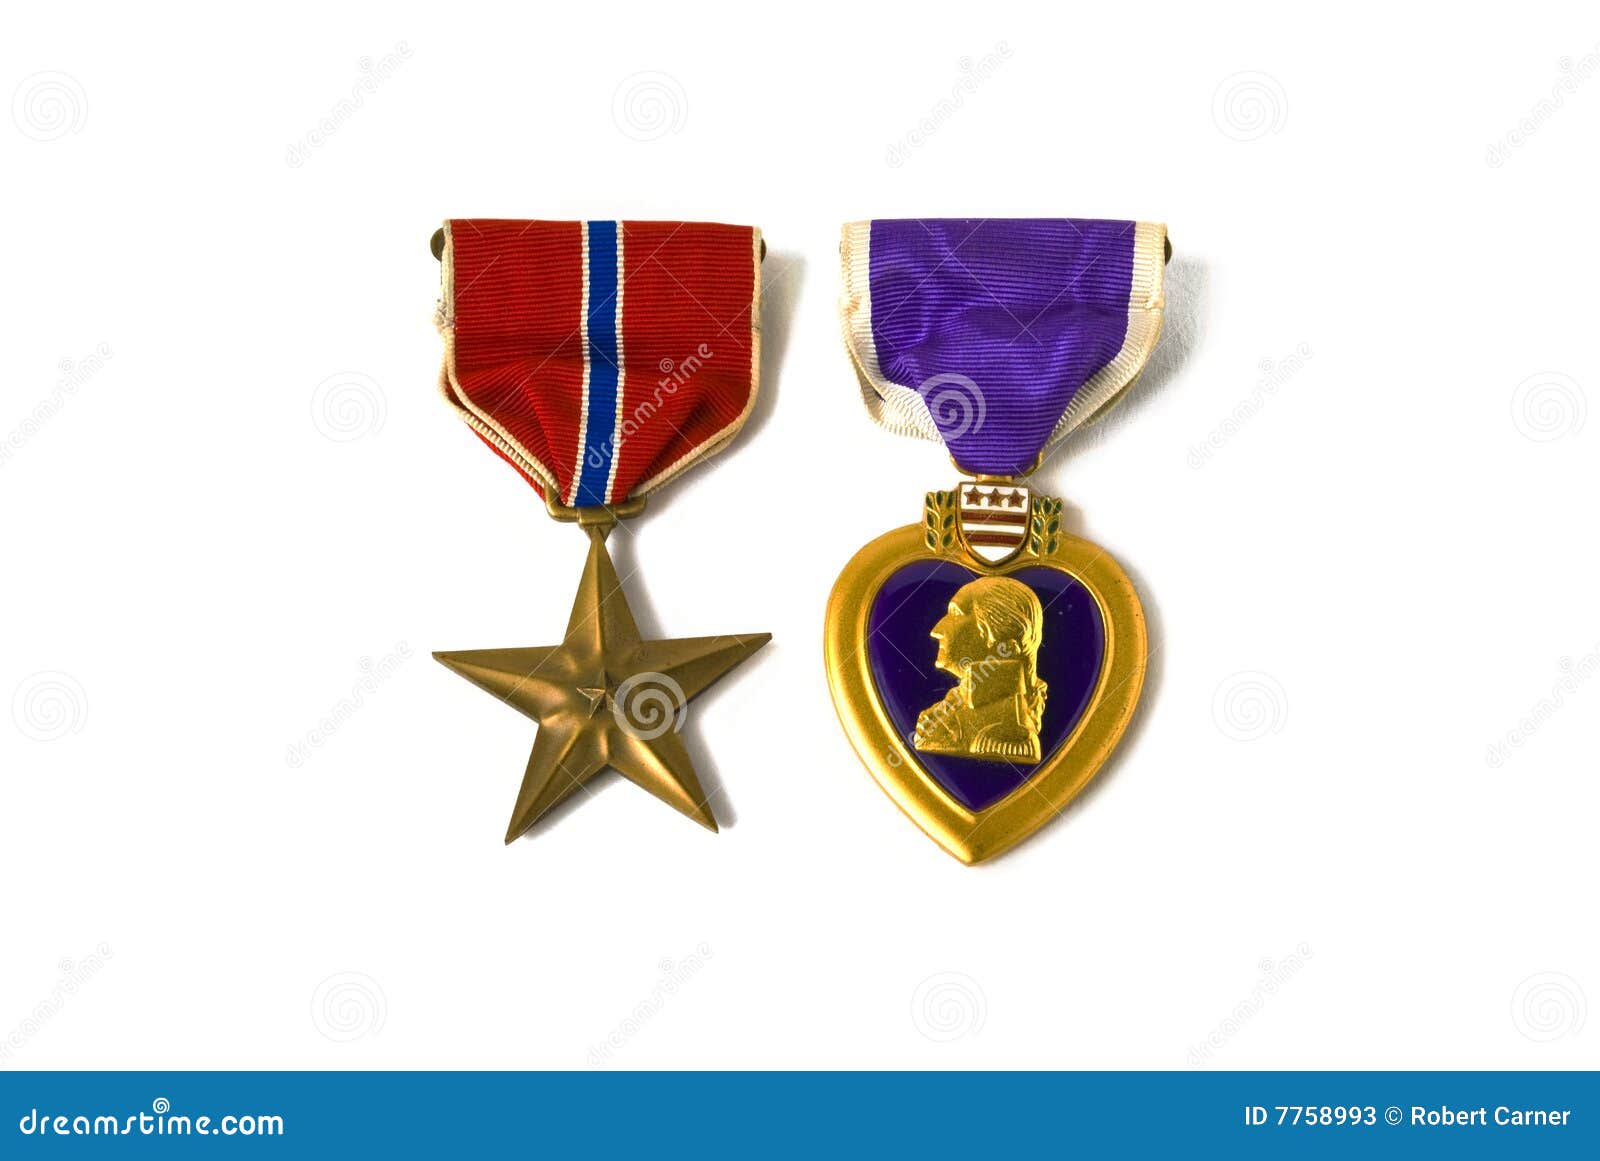 military medal clipart - photo #13